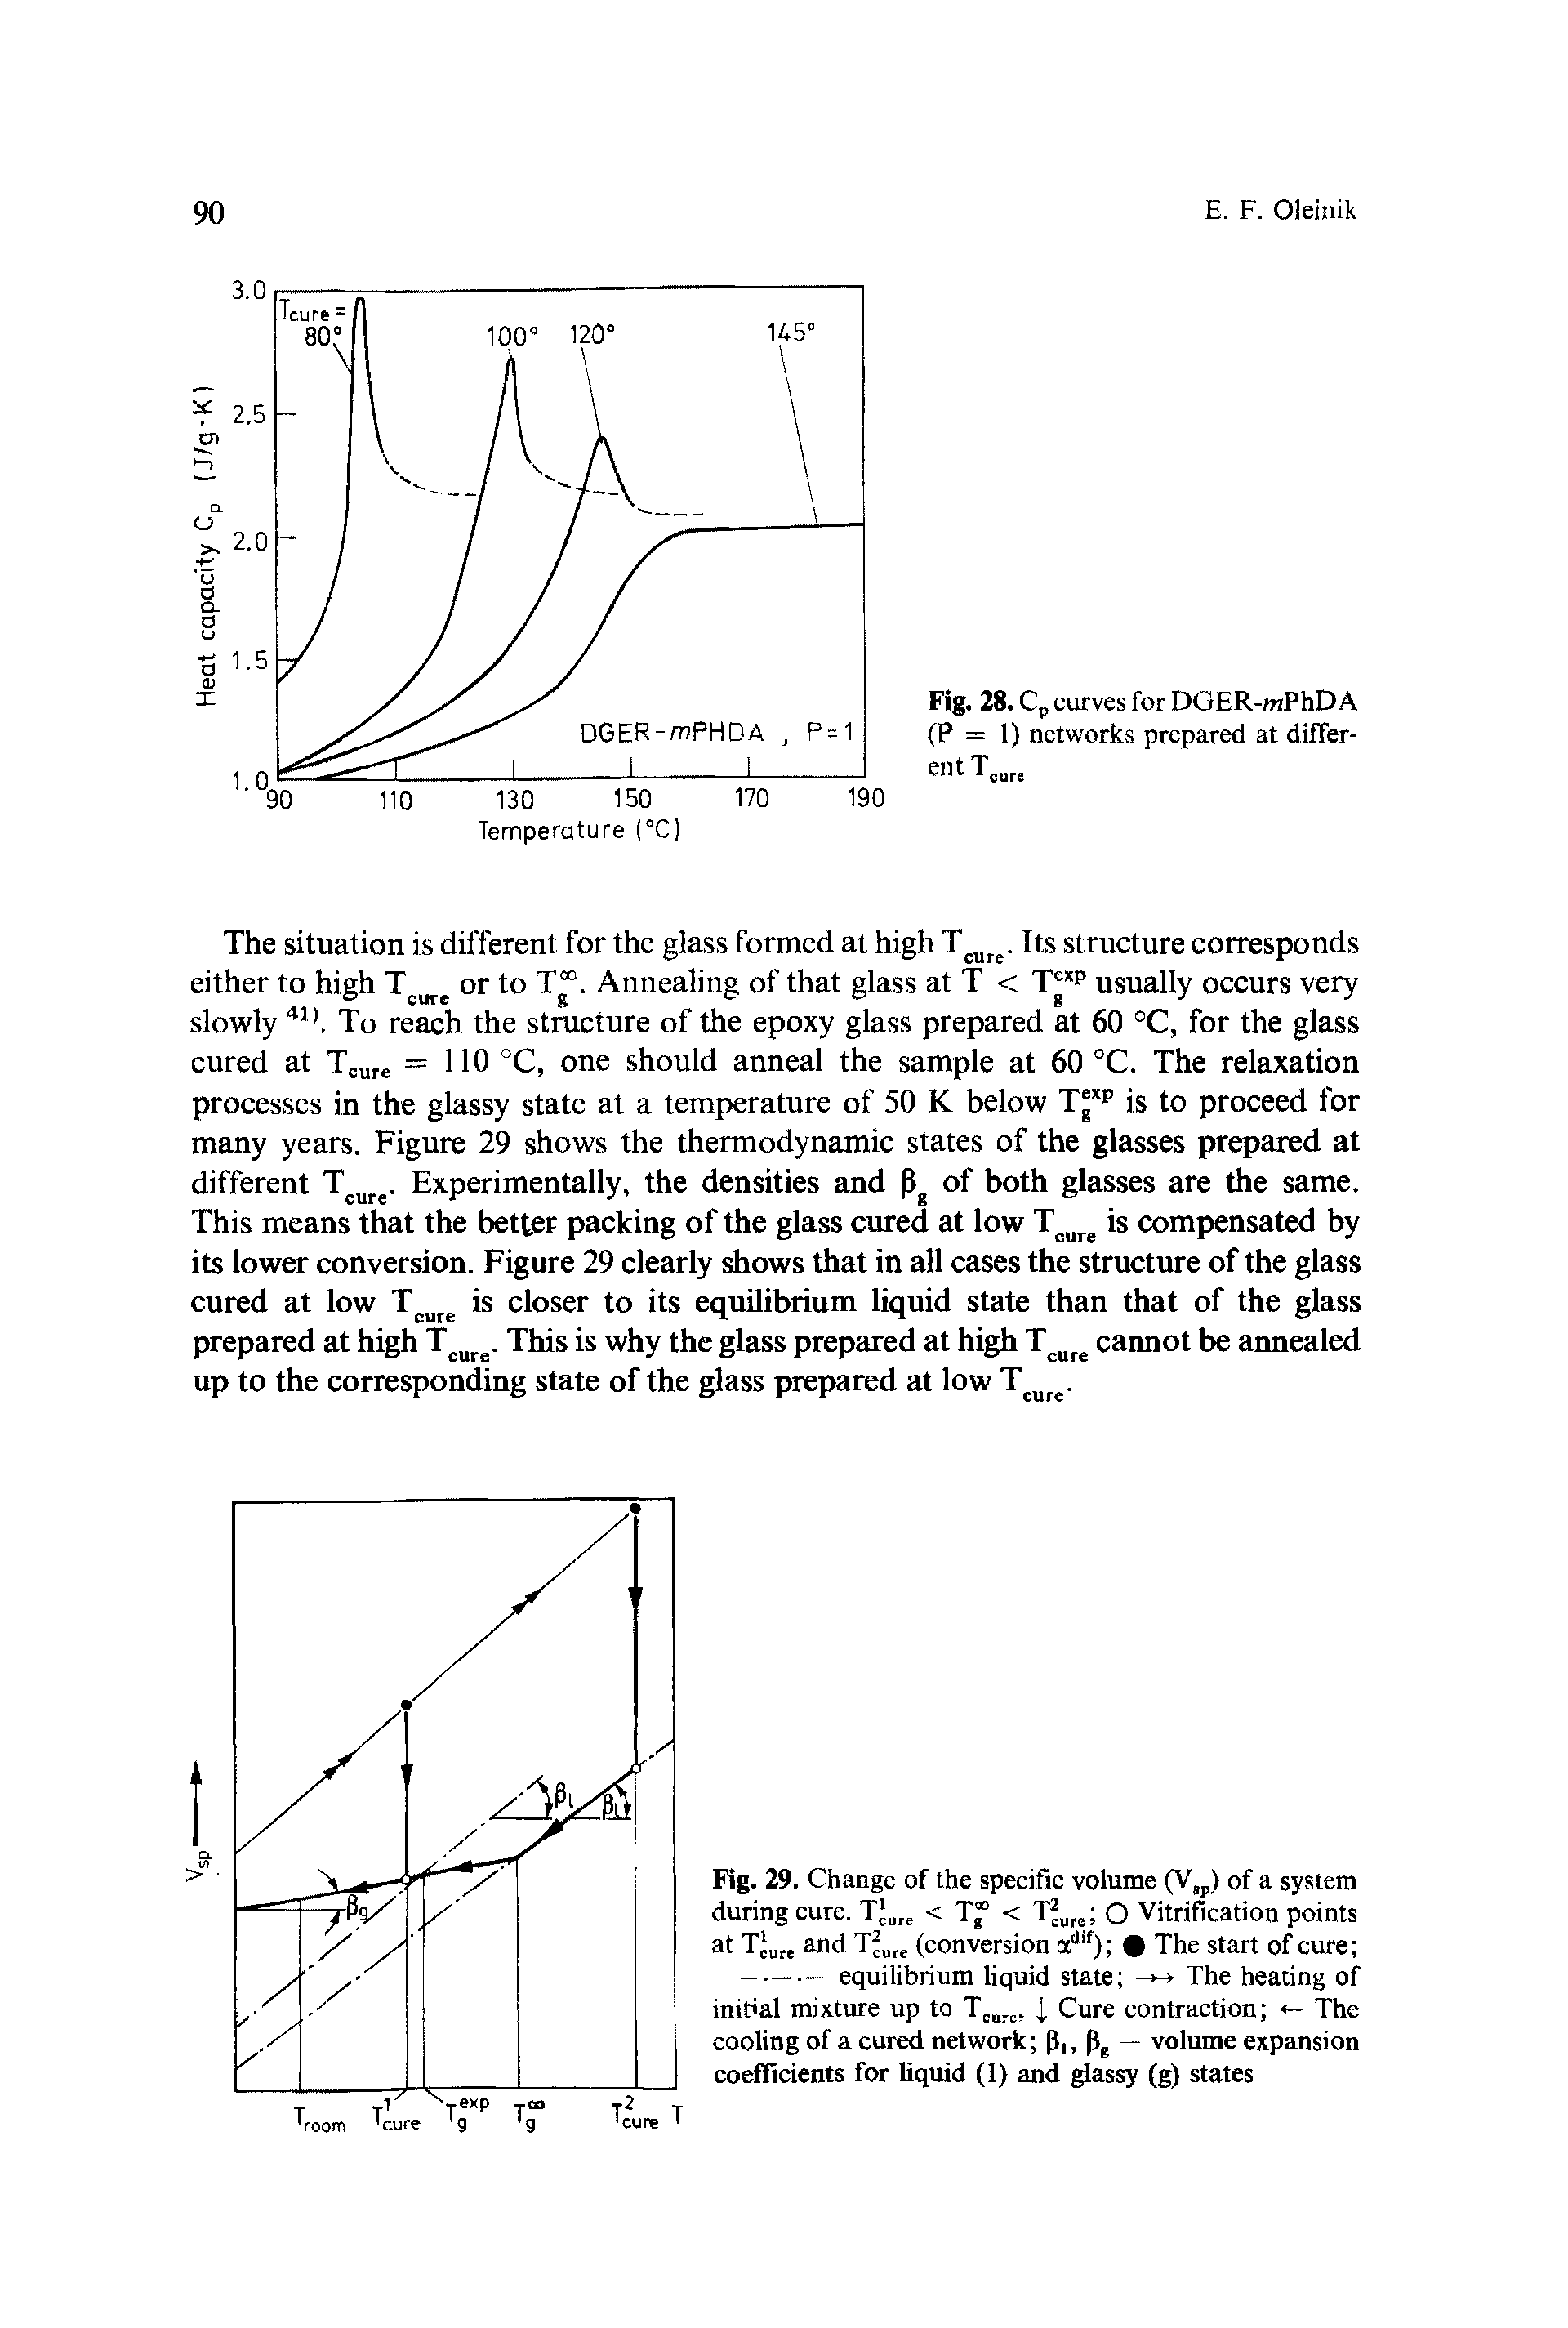 Fig. 29. Change of the specific volume (Vsp) of a system during cure. Tjure < T < T UIC O Vitrification points at Tjute and TPure (conversion The start of cure ...